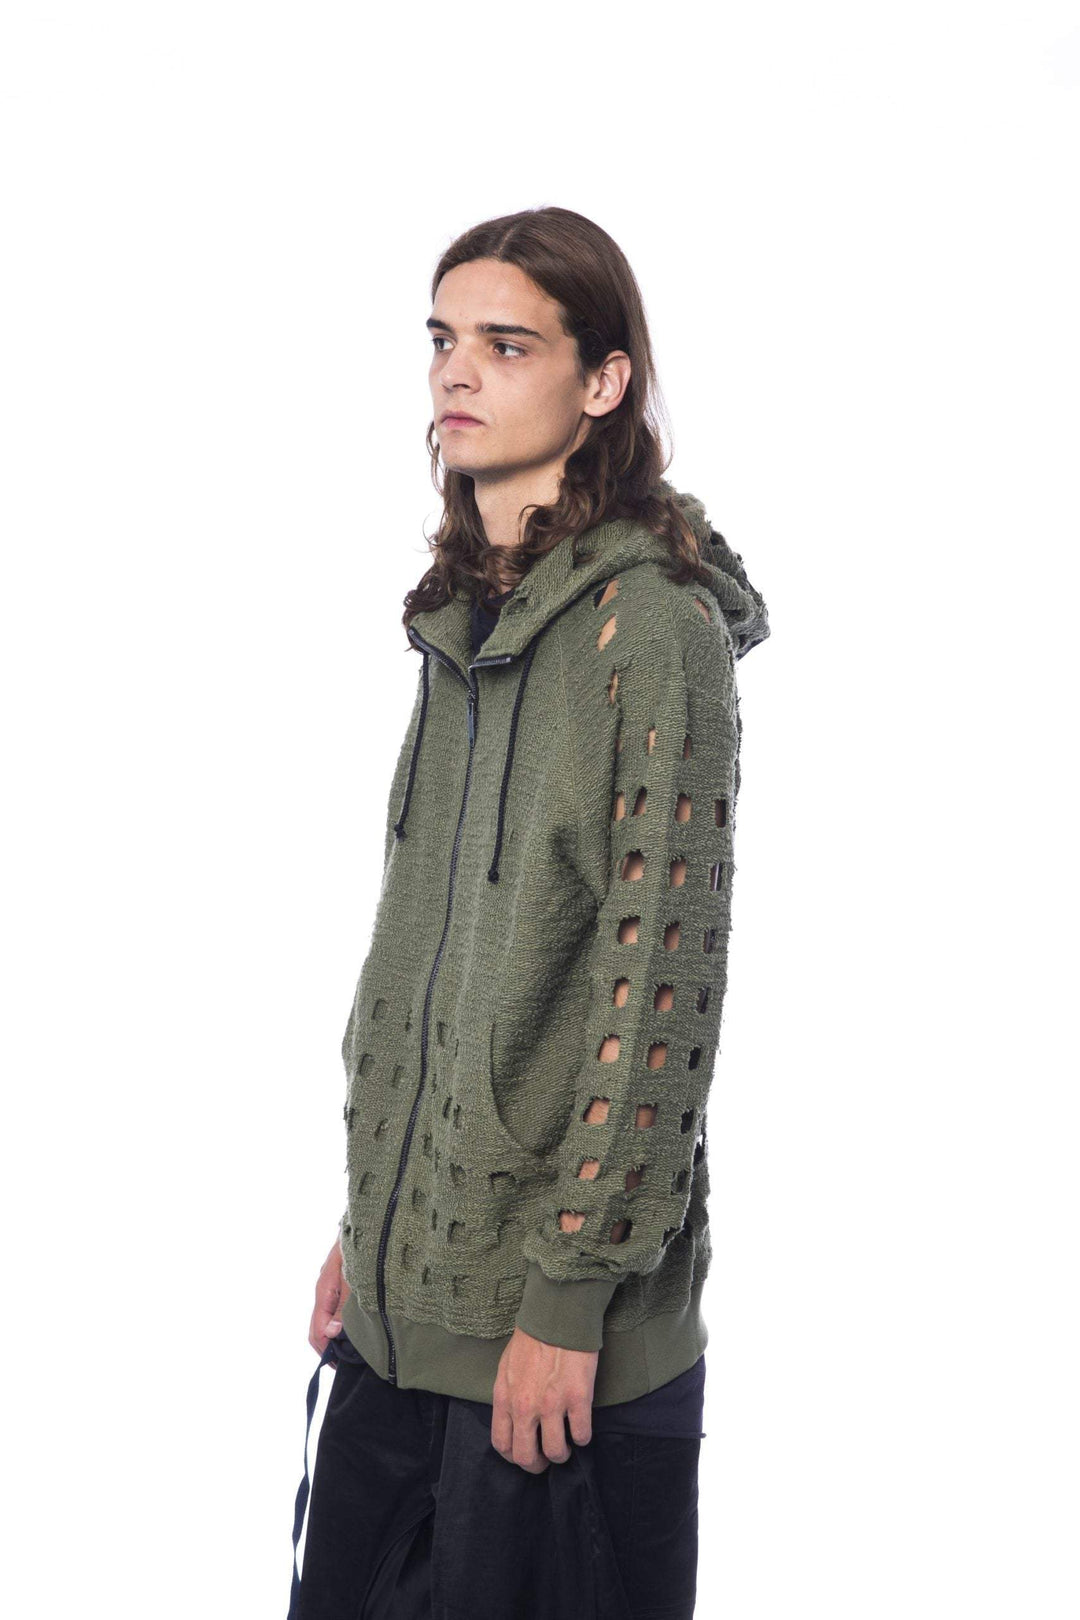 Nicolo Tonetto hooded zipped Sweater #men, Army, feed-agegroup-adult, feed-color-Army, feed-gender-male, L, M, Nicolo Tonetto, S, Sweaters - Men - Clothing, XL at SEYMAYKA